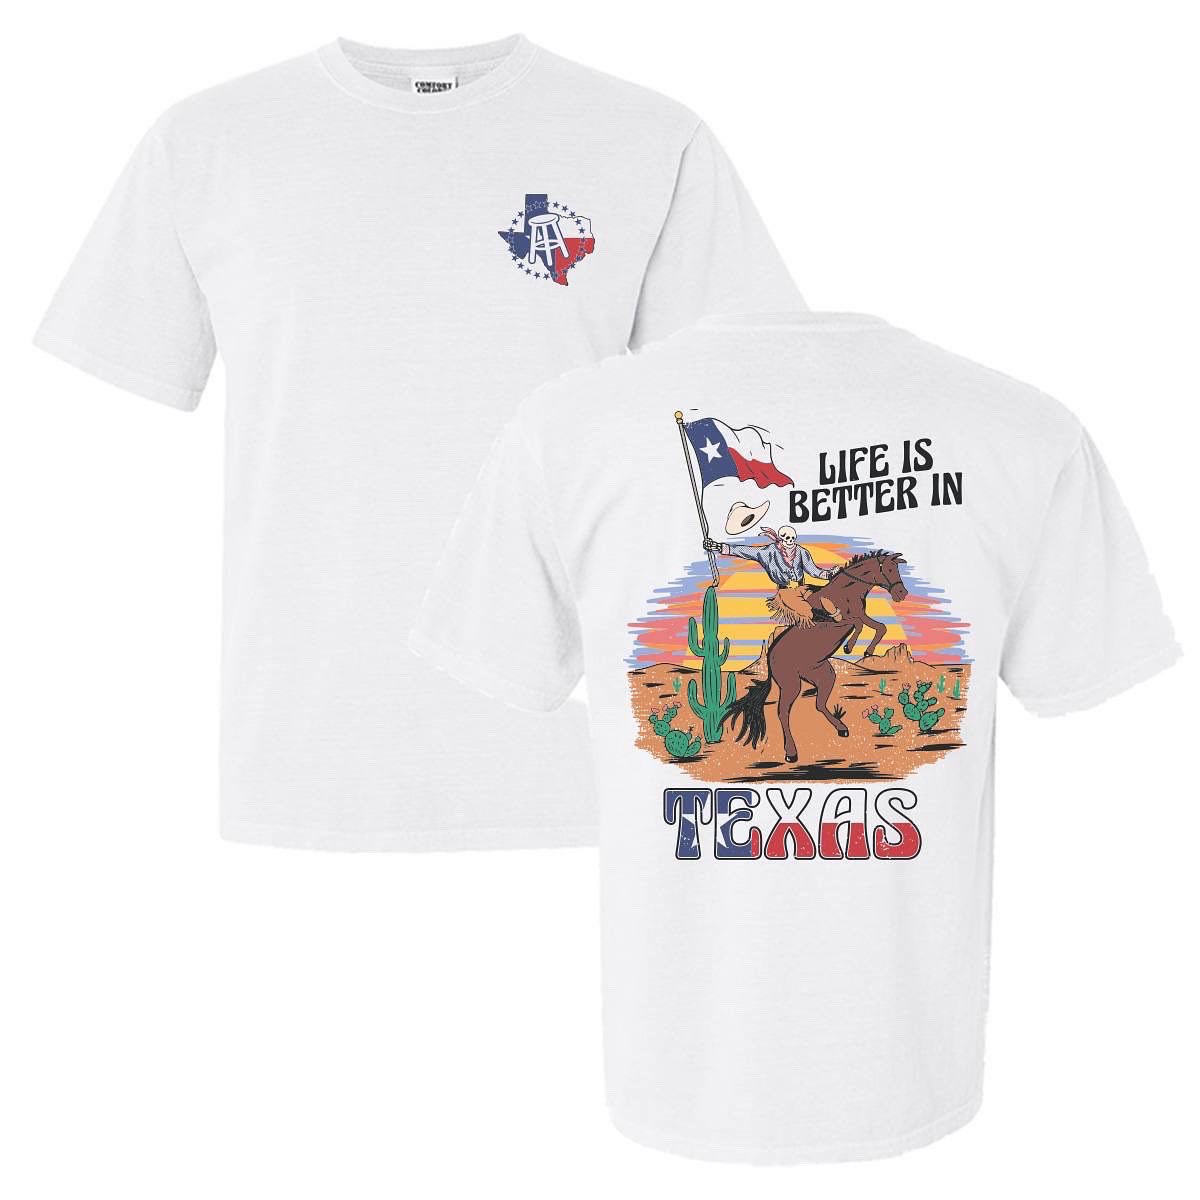 The best food, the best sports, the best music, everything about Texas is just BETTER. Go get your “Life Is Better In Texas.” store.barstoolsports.com/products/life-…